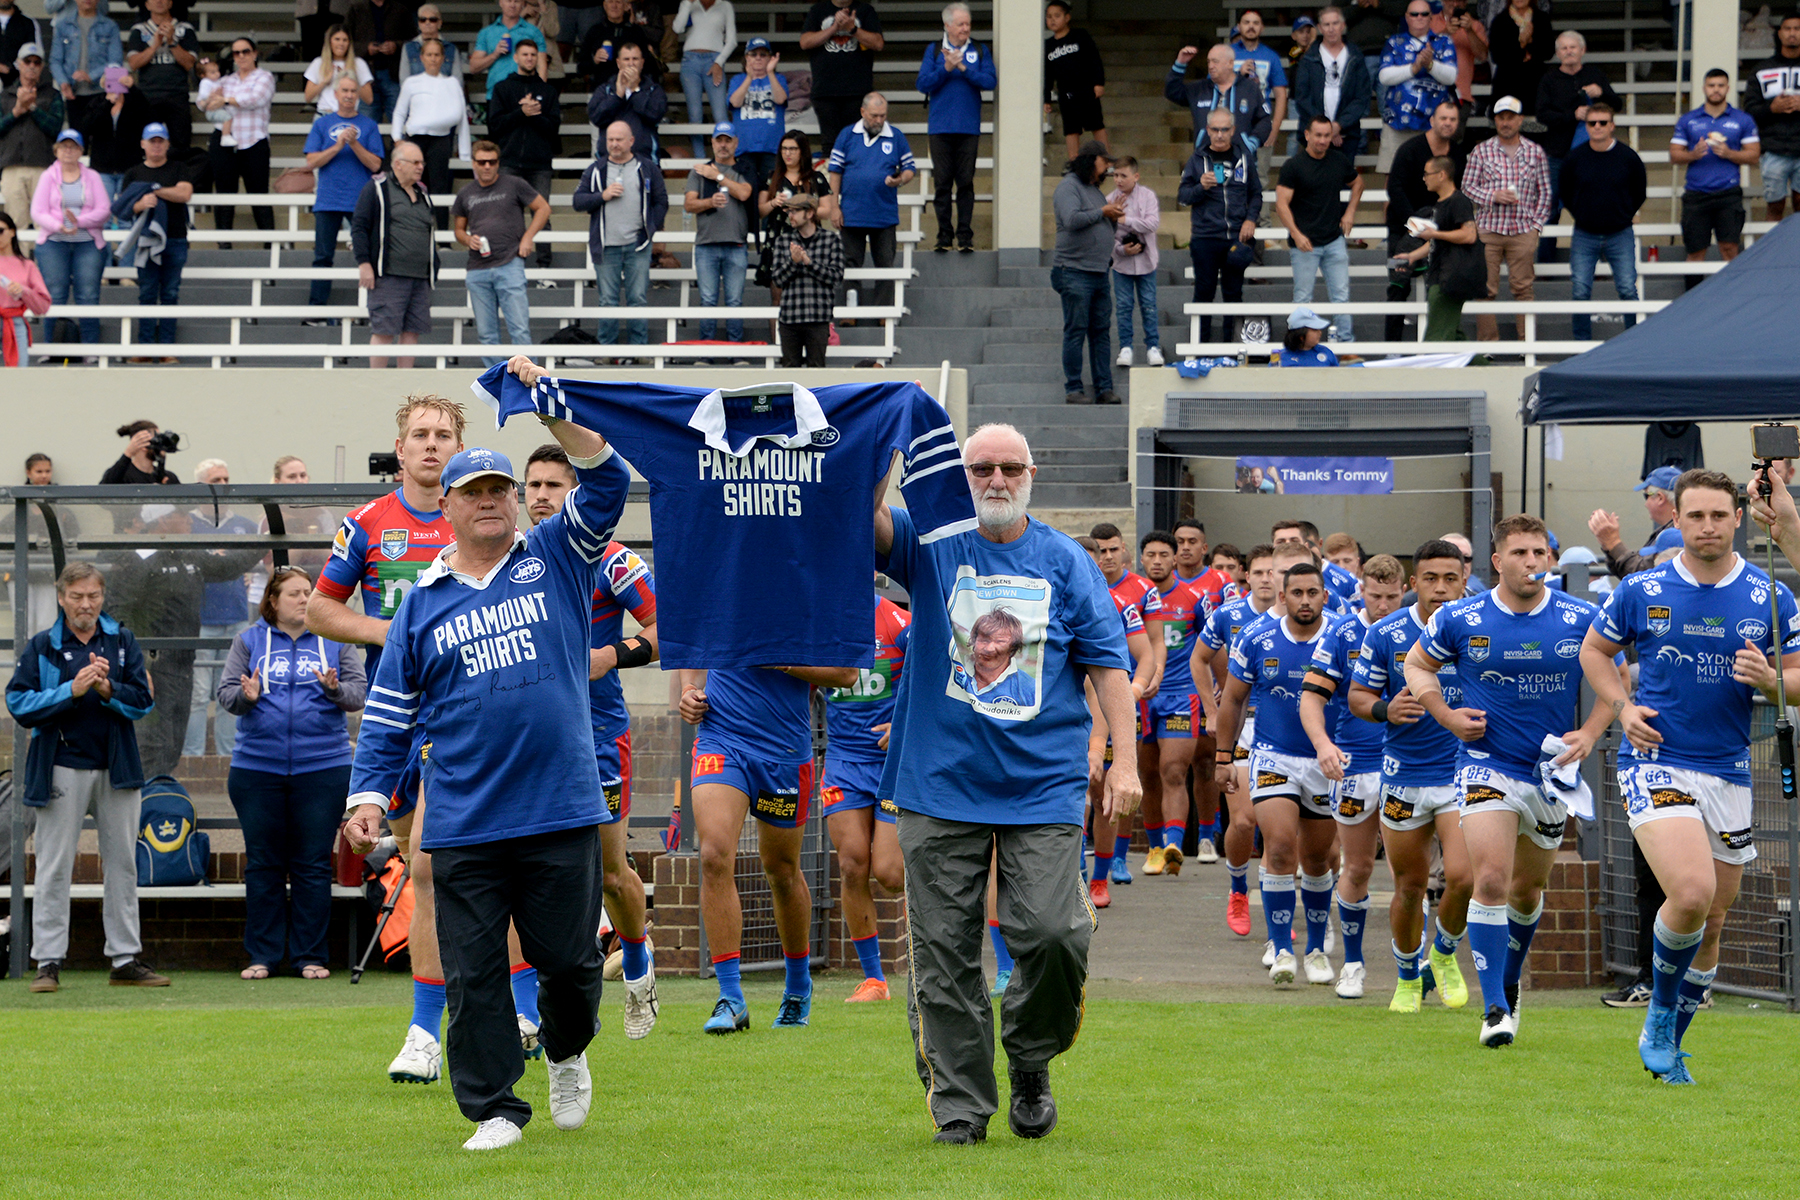 Two outstanding identities with many years of association with the Newtown RLFC, Colin Murphy (left) and Johnny Lewis, lead the teams out at Henson Park on Saturday while carrying a number seven jersey in honour of the late Tom Raudonikis.

 

Photo:
Michael Magee Photography.